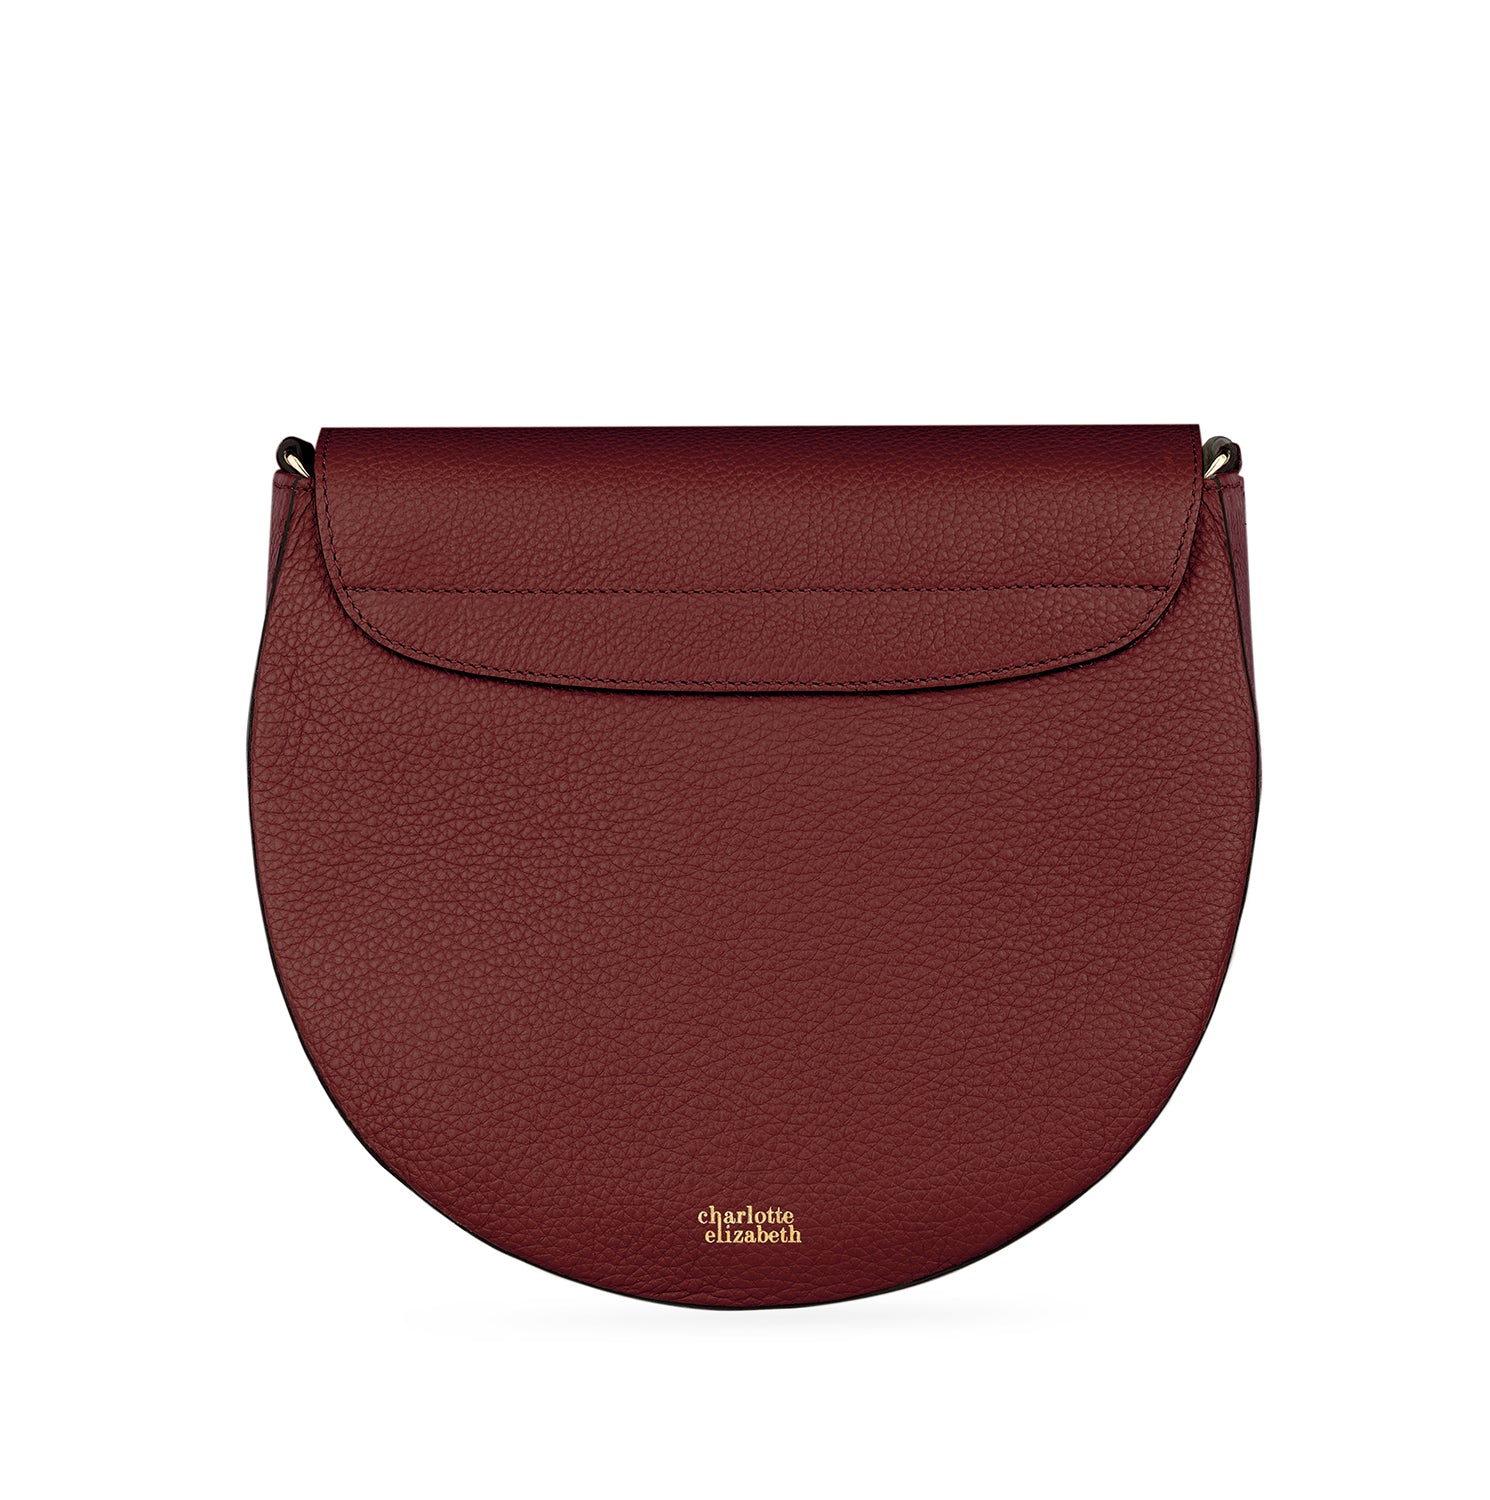 saddle half moon bag in crimson with pebble leather